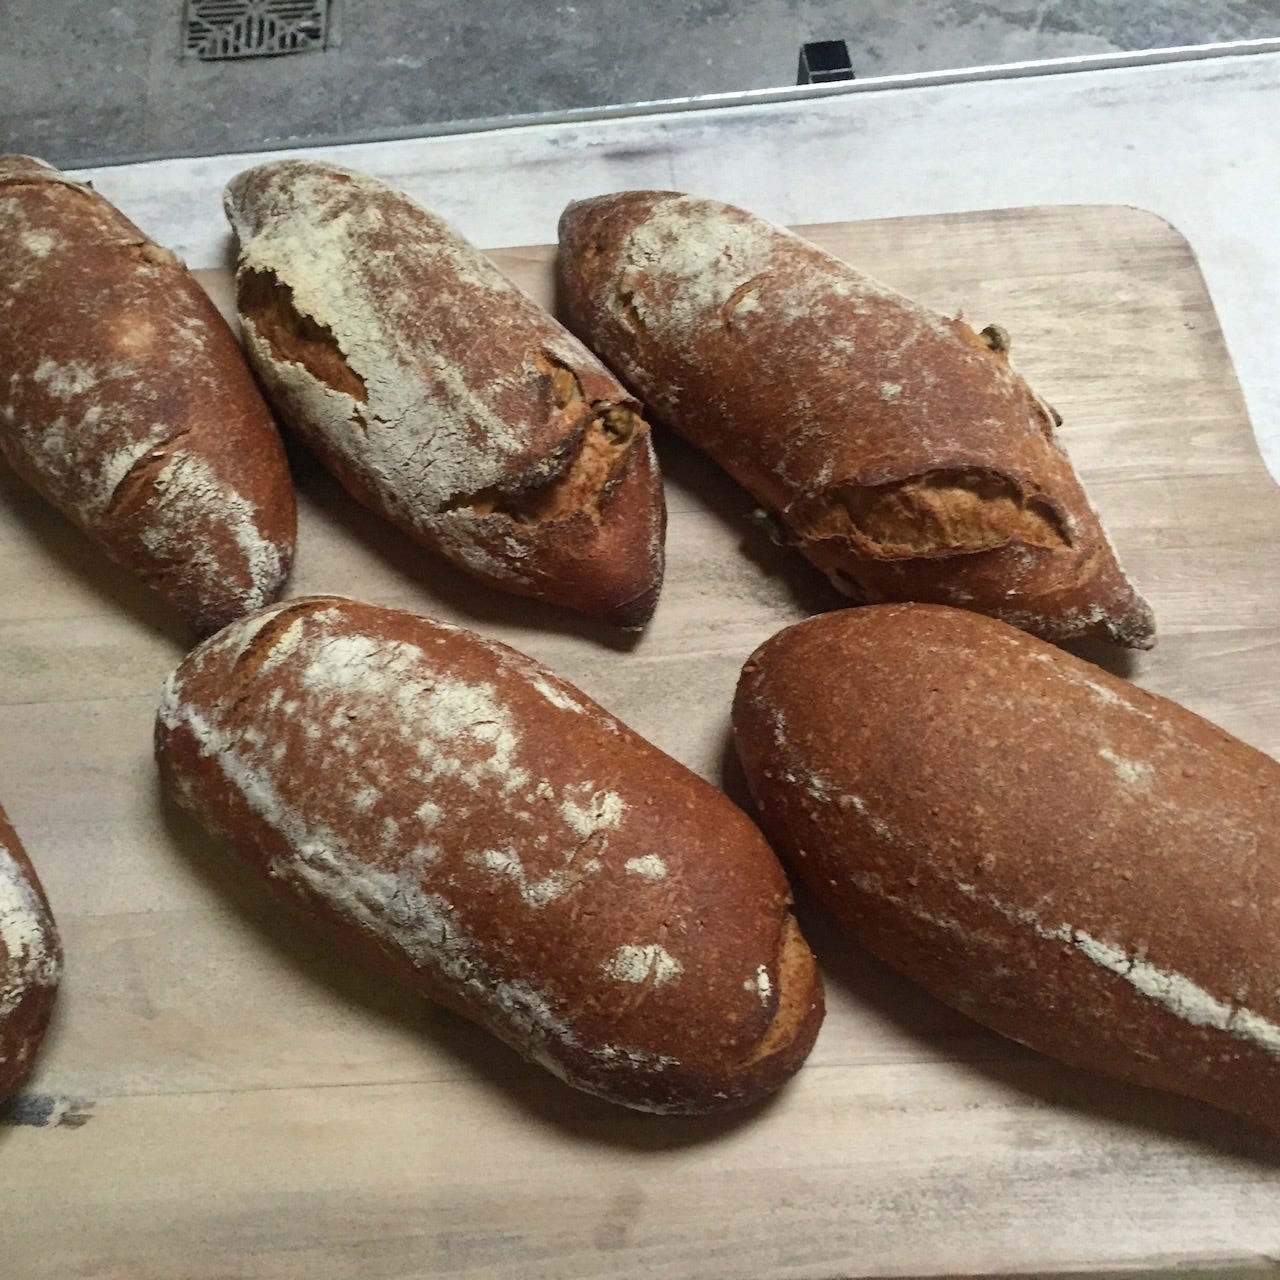 Five unscored golden brown loaves on a bread baking peel.